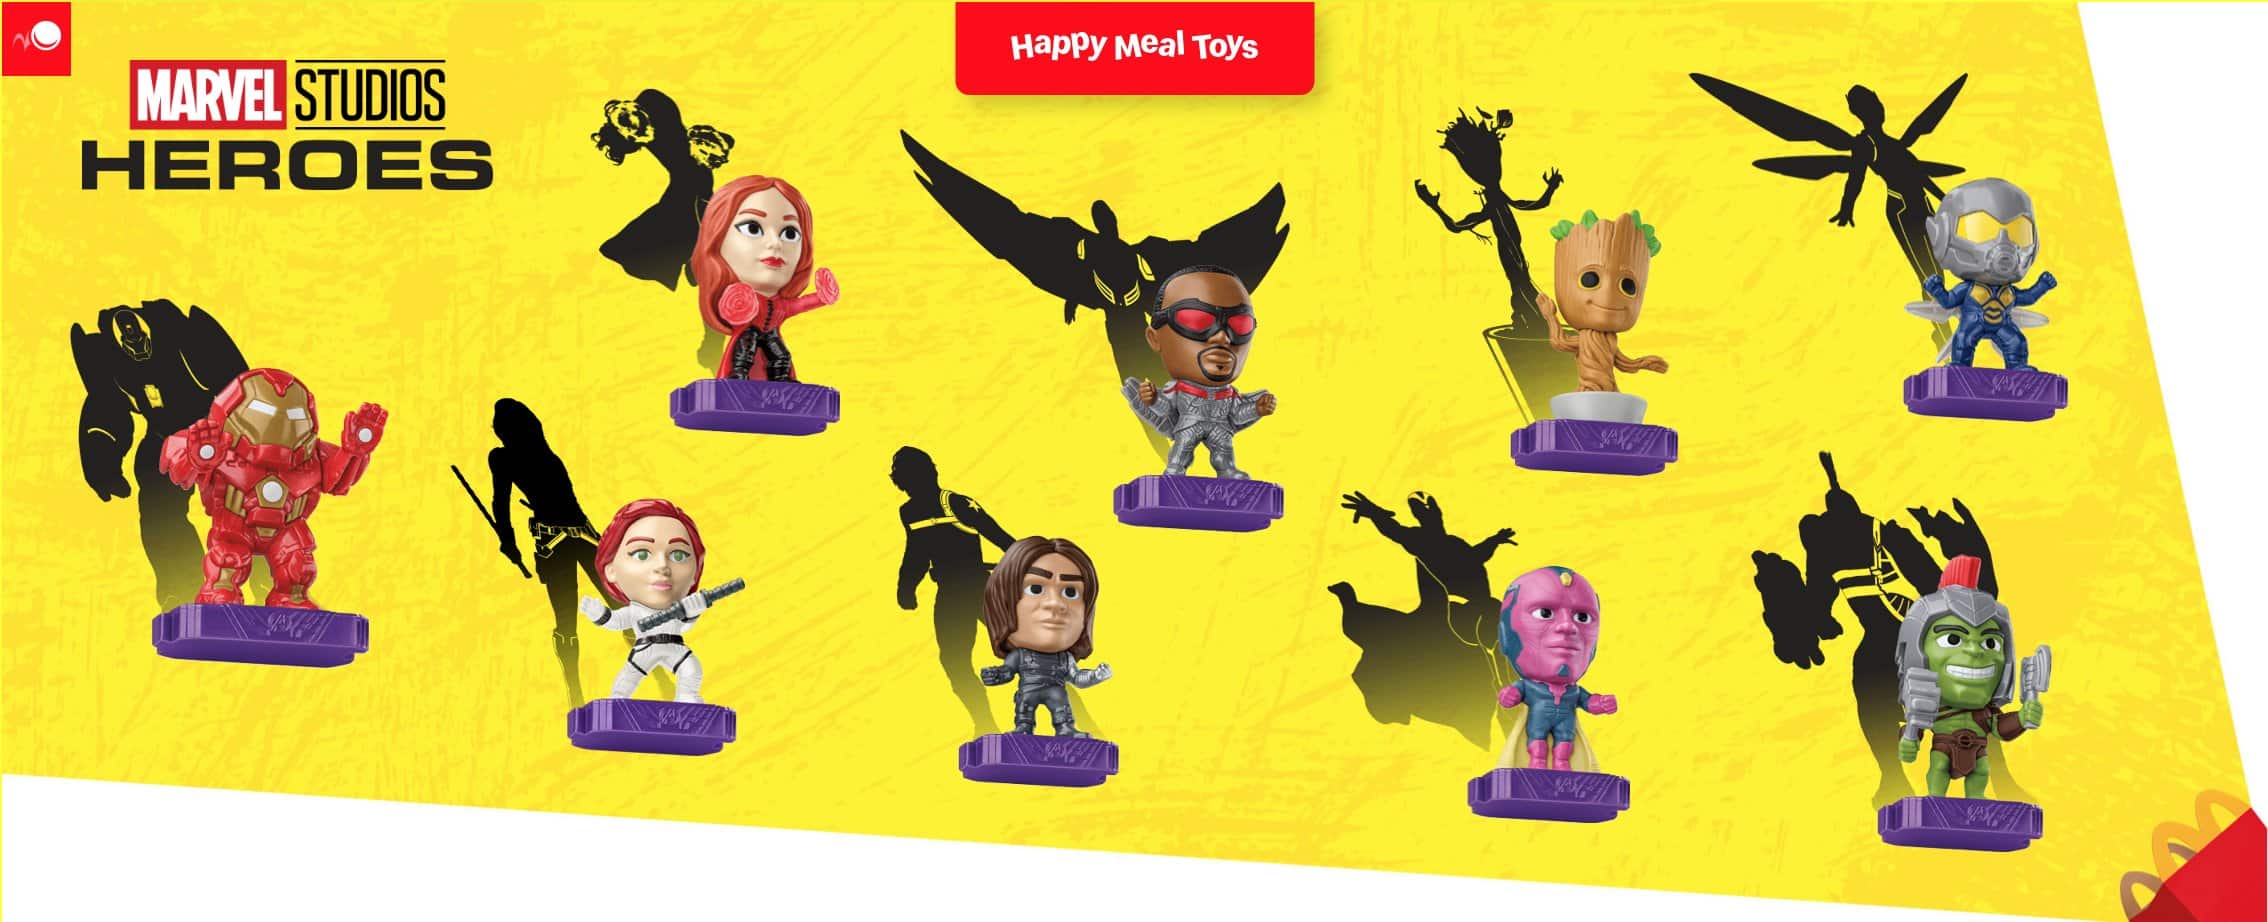 Happy meal toys april 2021